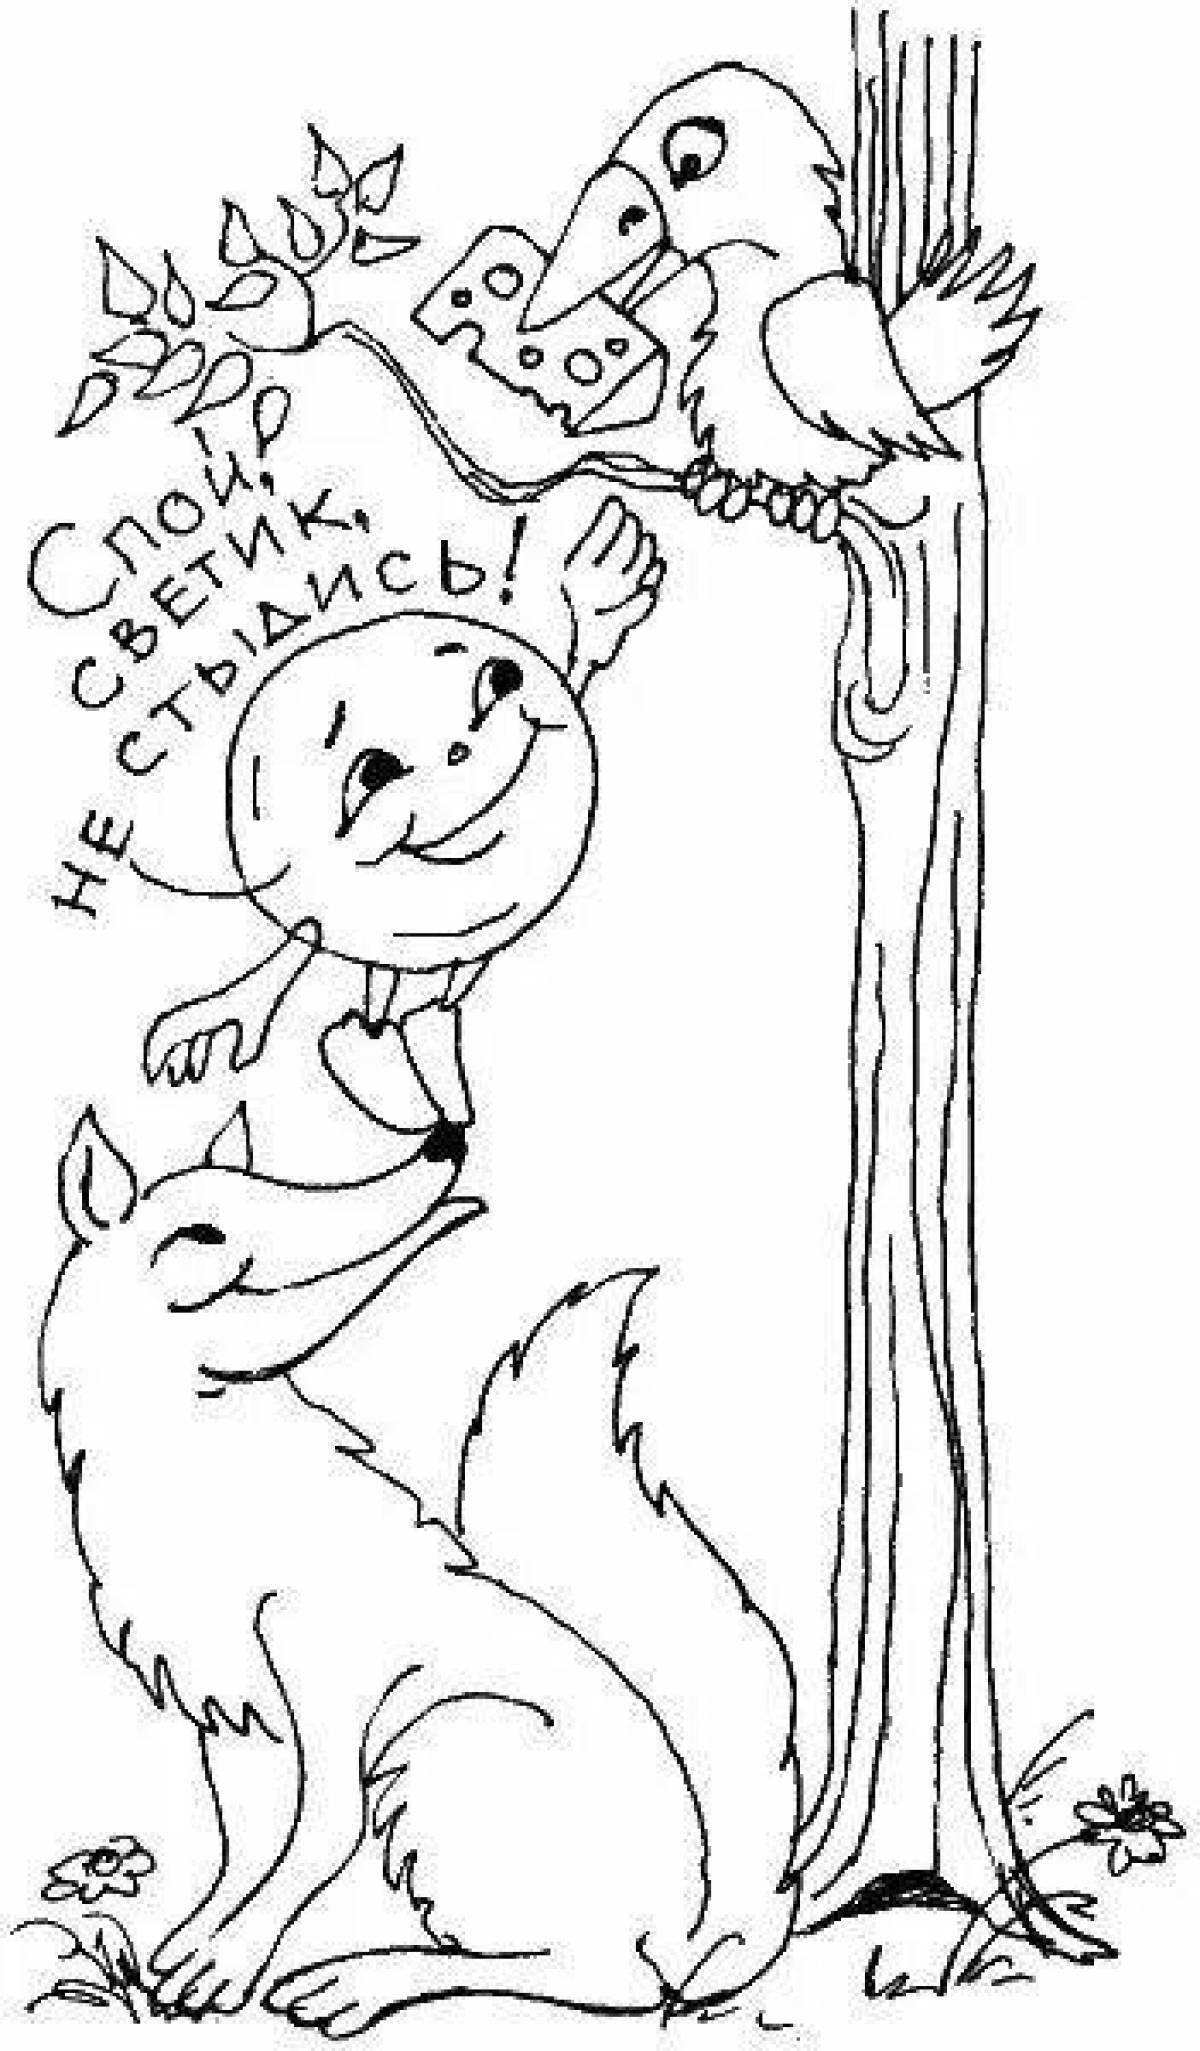 Coloring book humorous fox and crow